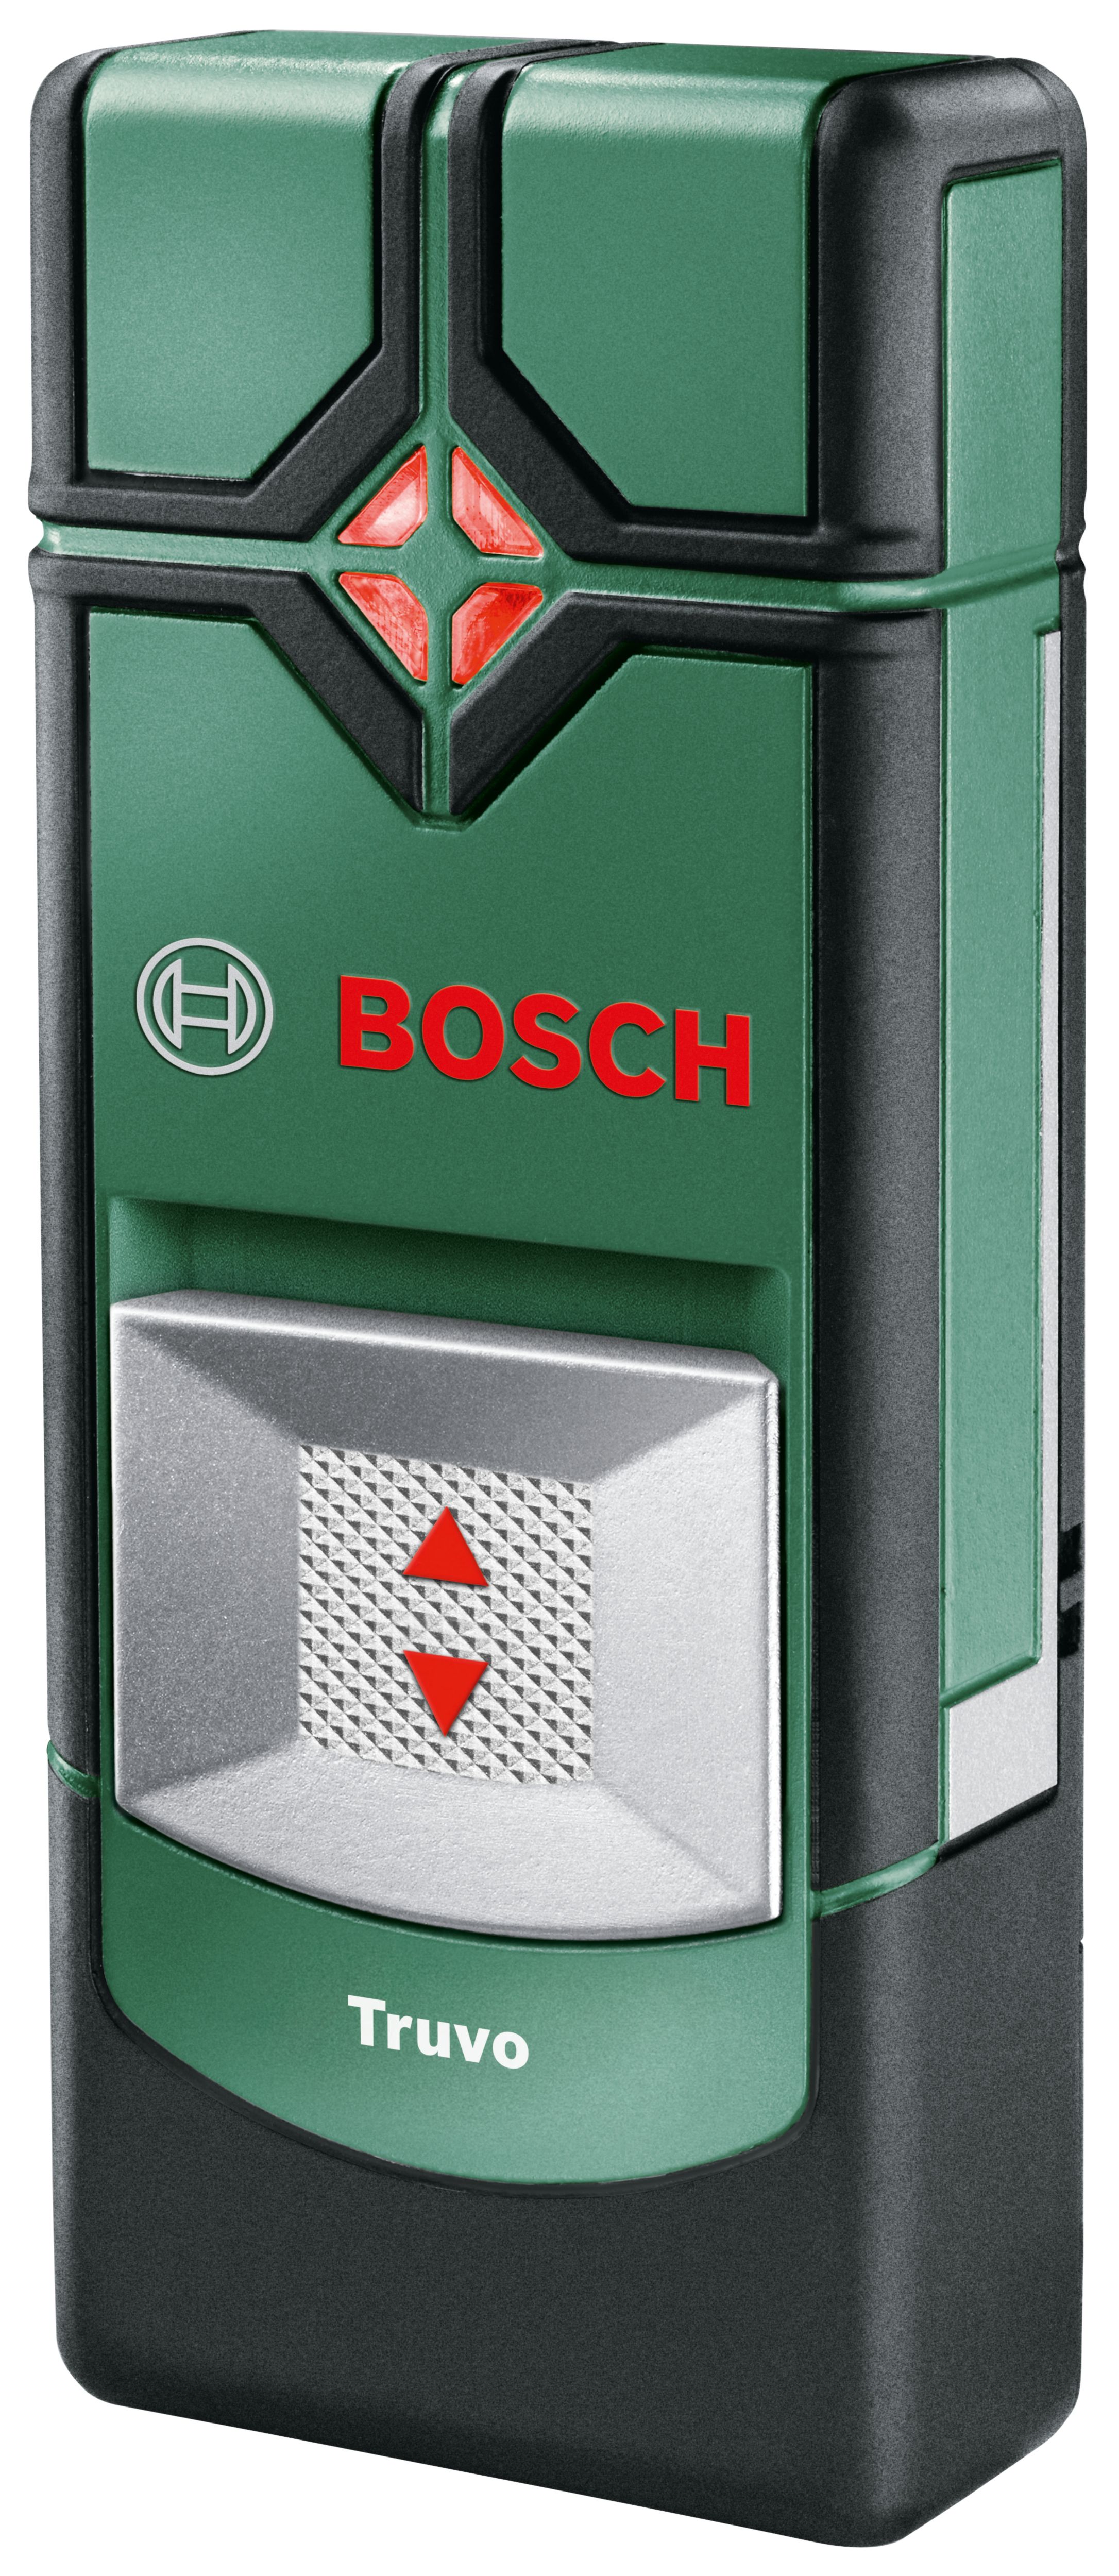 Image of Bosch Truvo Pipe and Cable Digital Detector